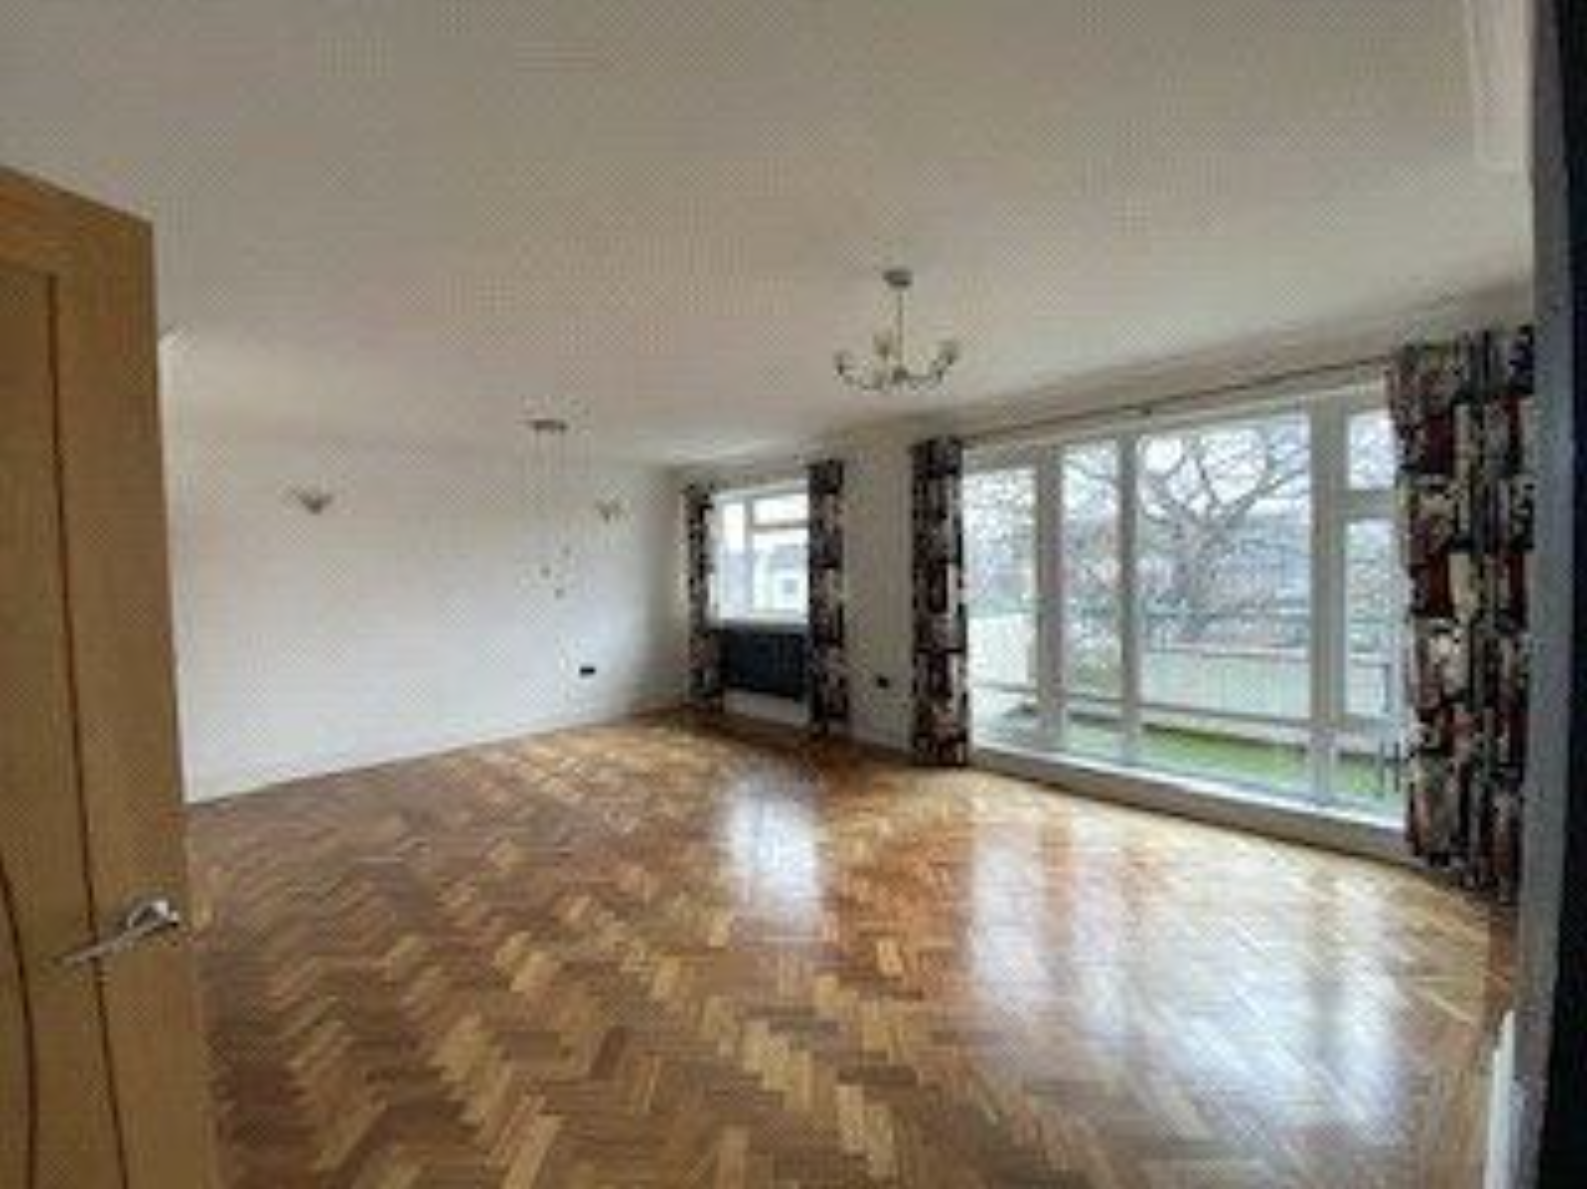 2 bed Duplex for rent in Southgate. From PropertyLoop